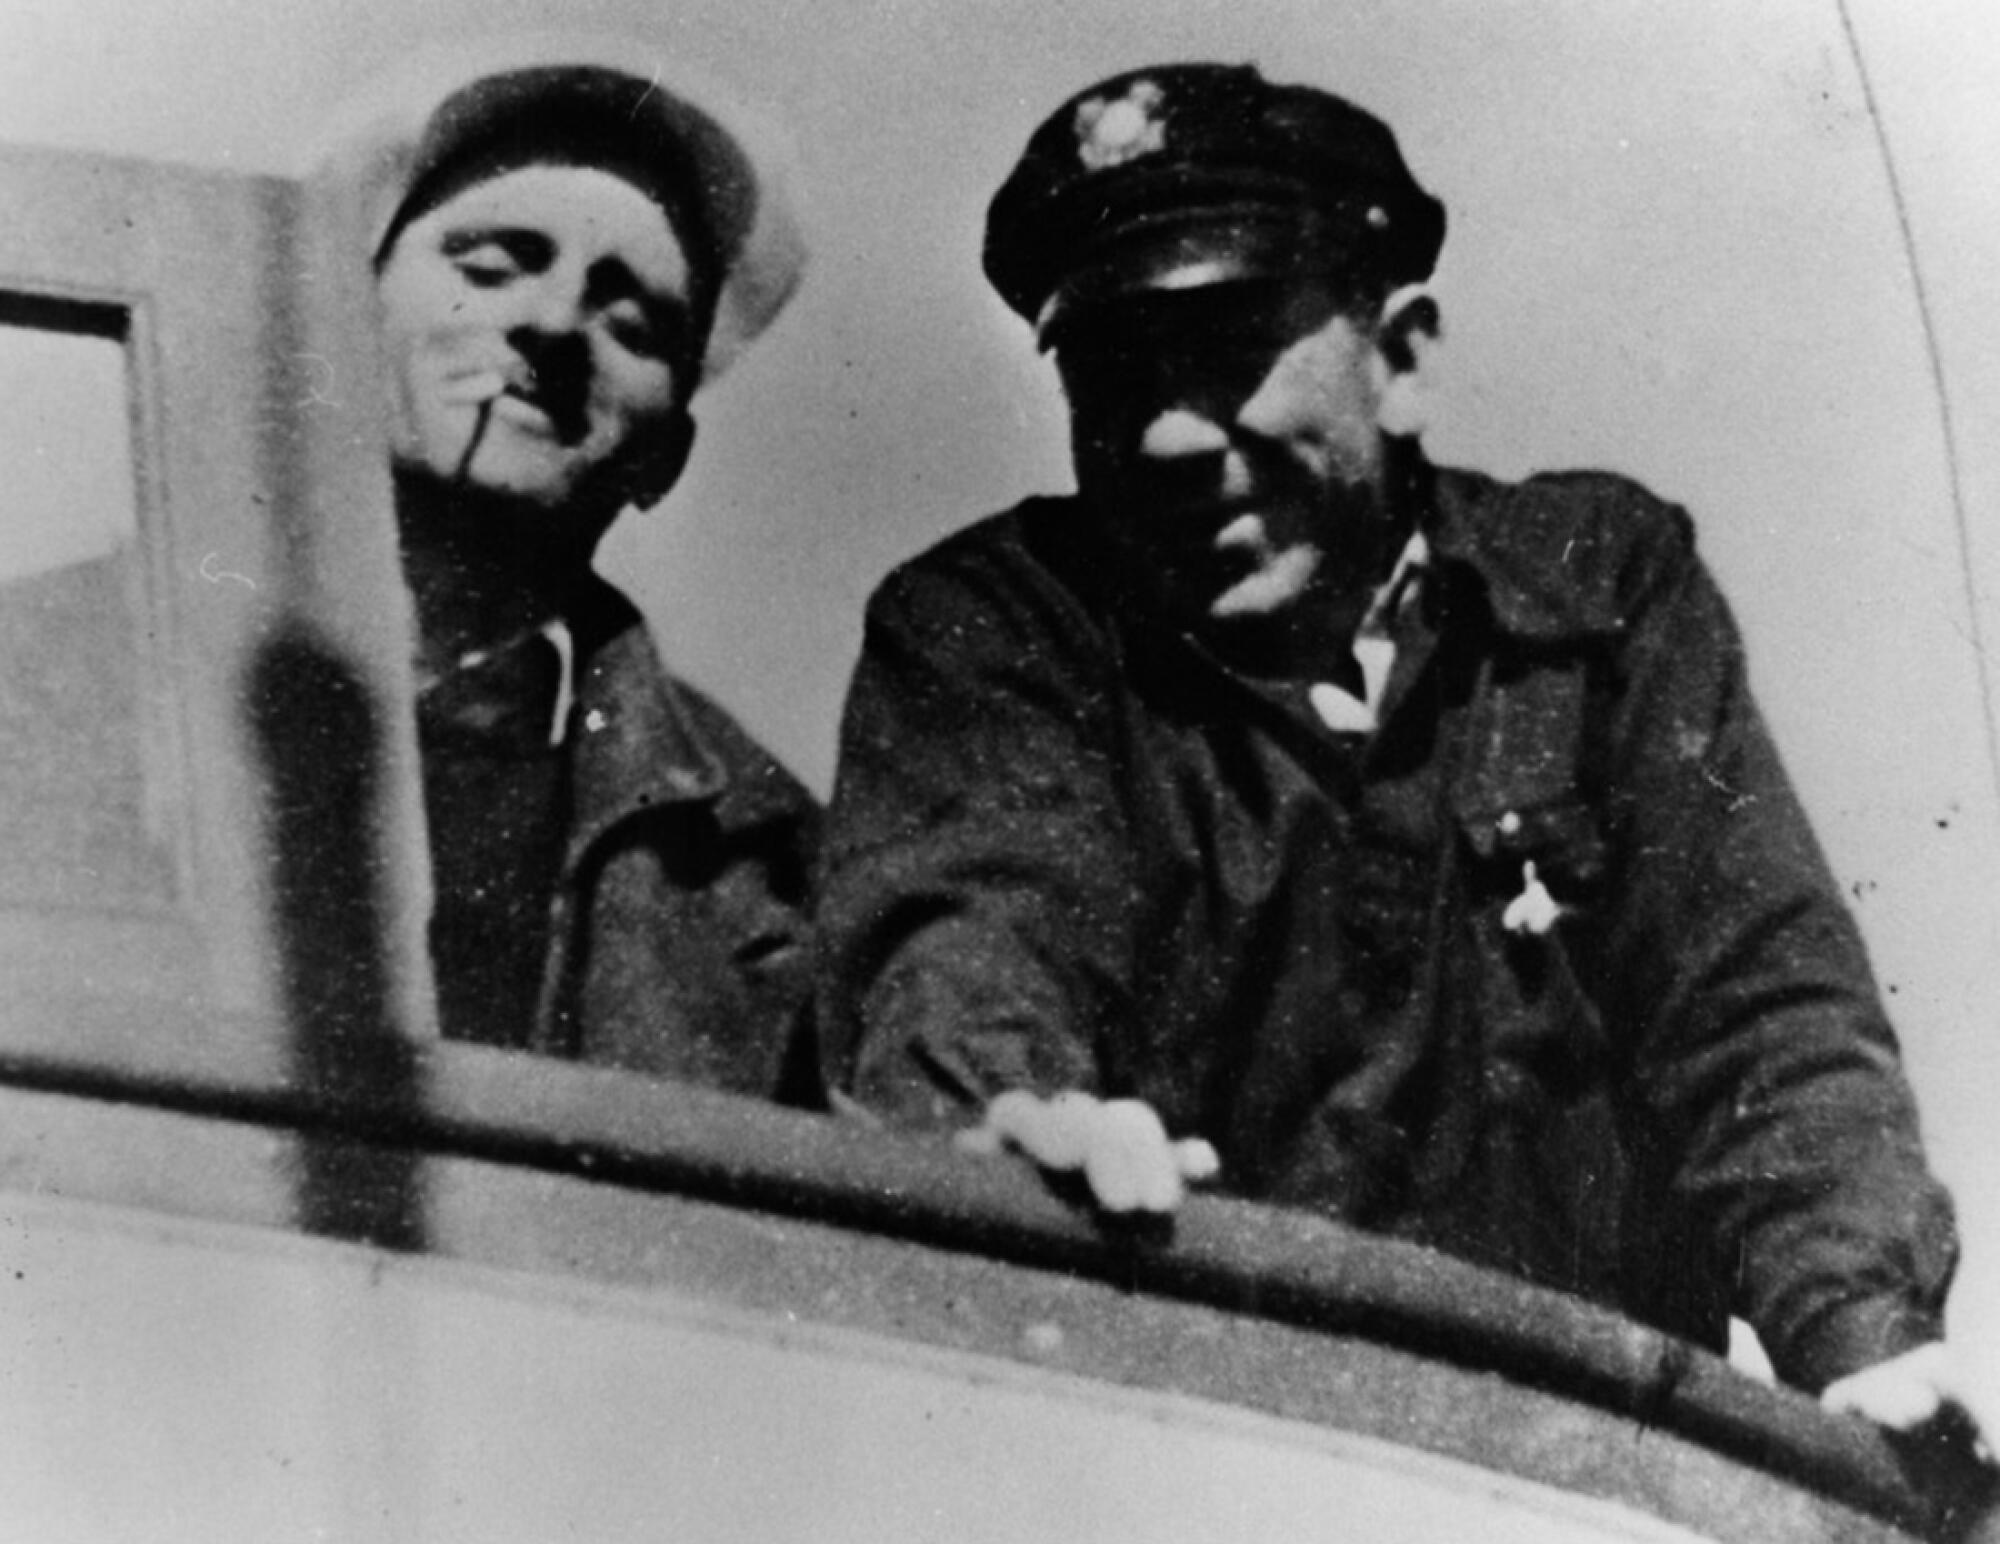 Two men, one with a cigarette in his mouth and the other in a sea captain's hat stand side by side on a boat